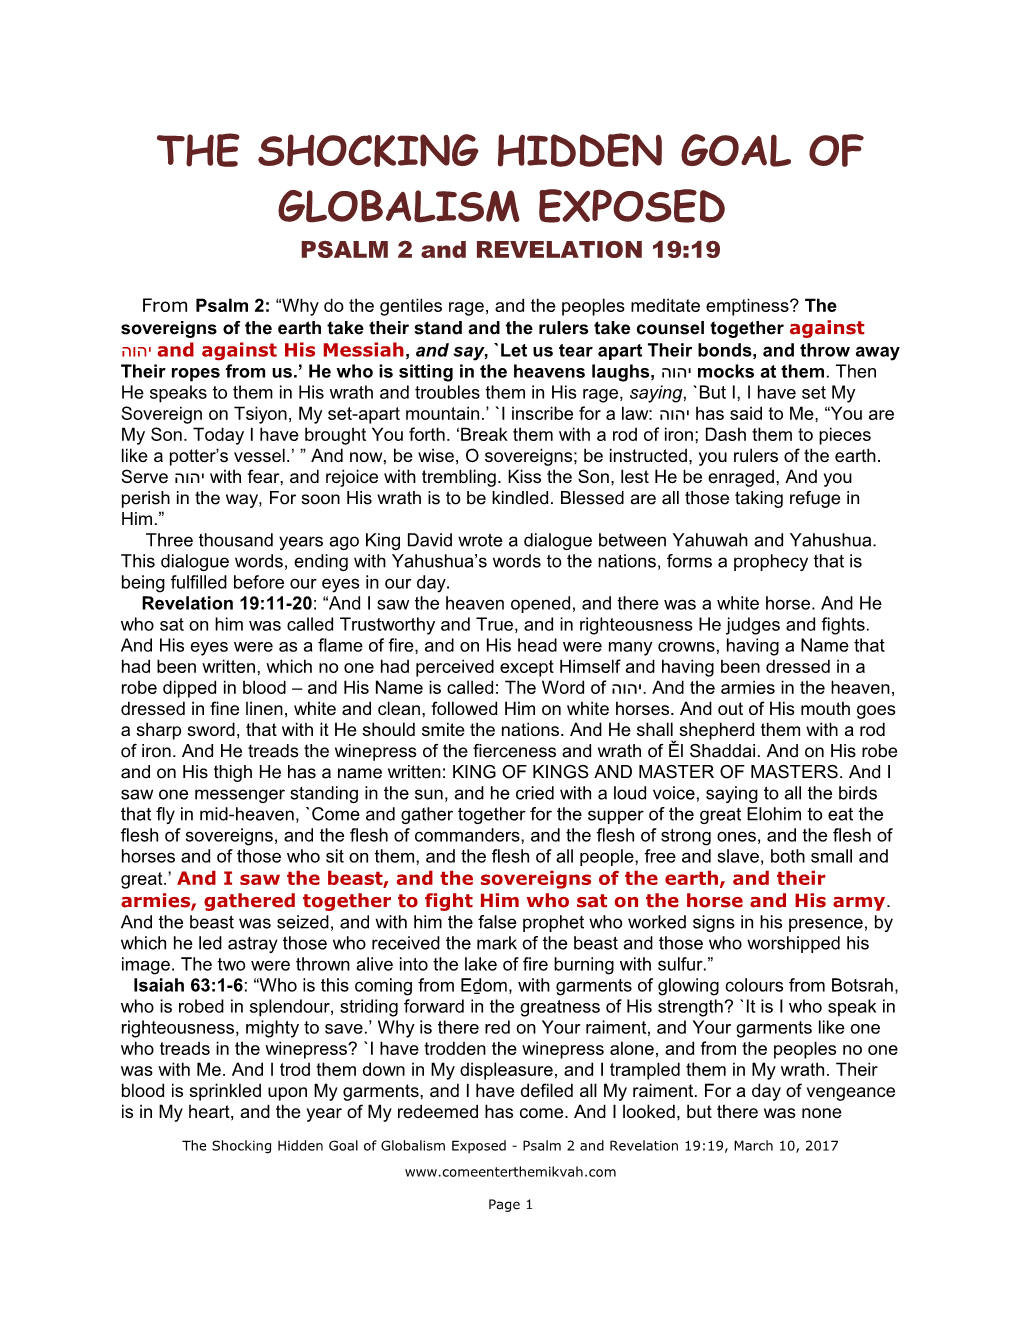 The Shocking Hidden Goal of Globalism Exposed